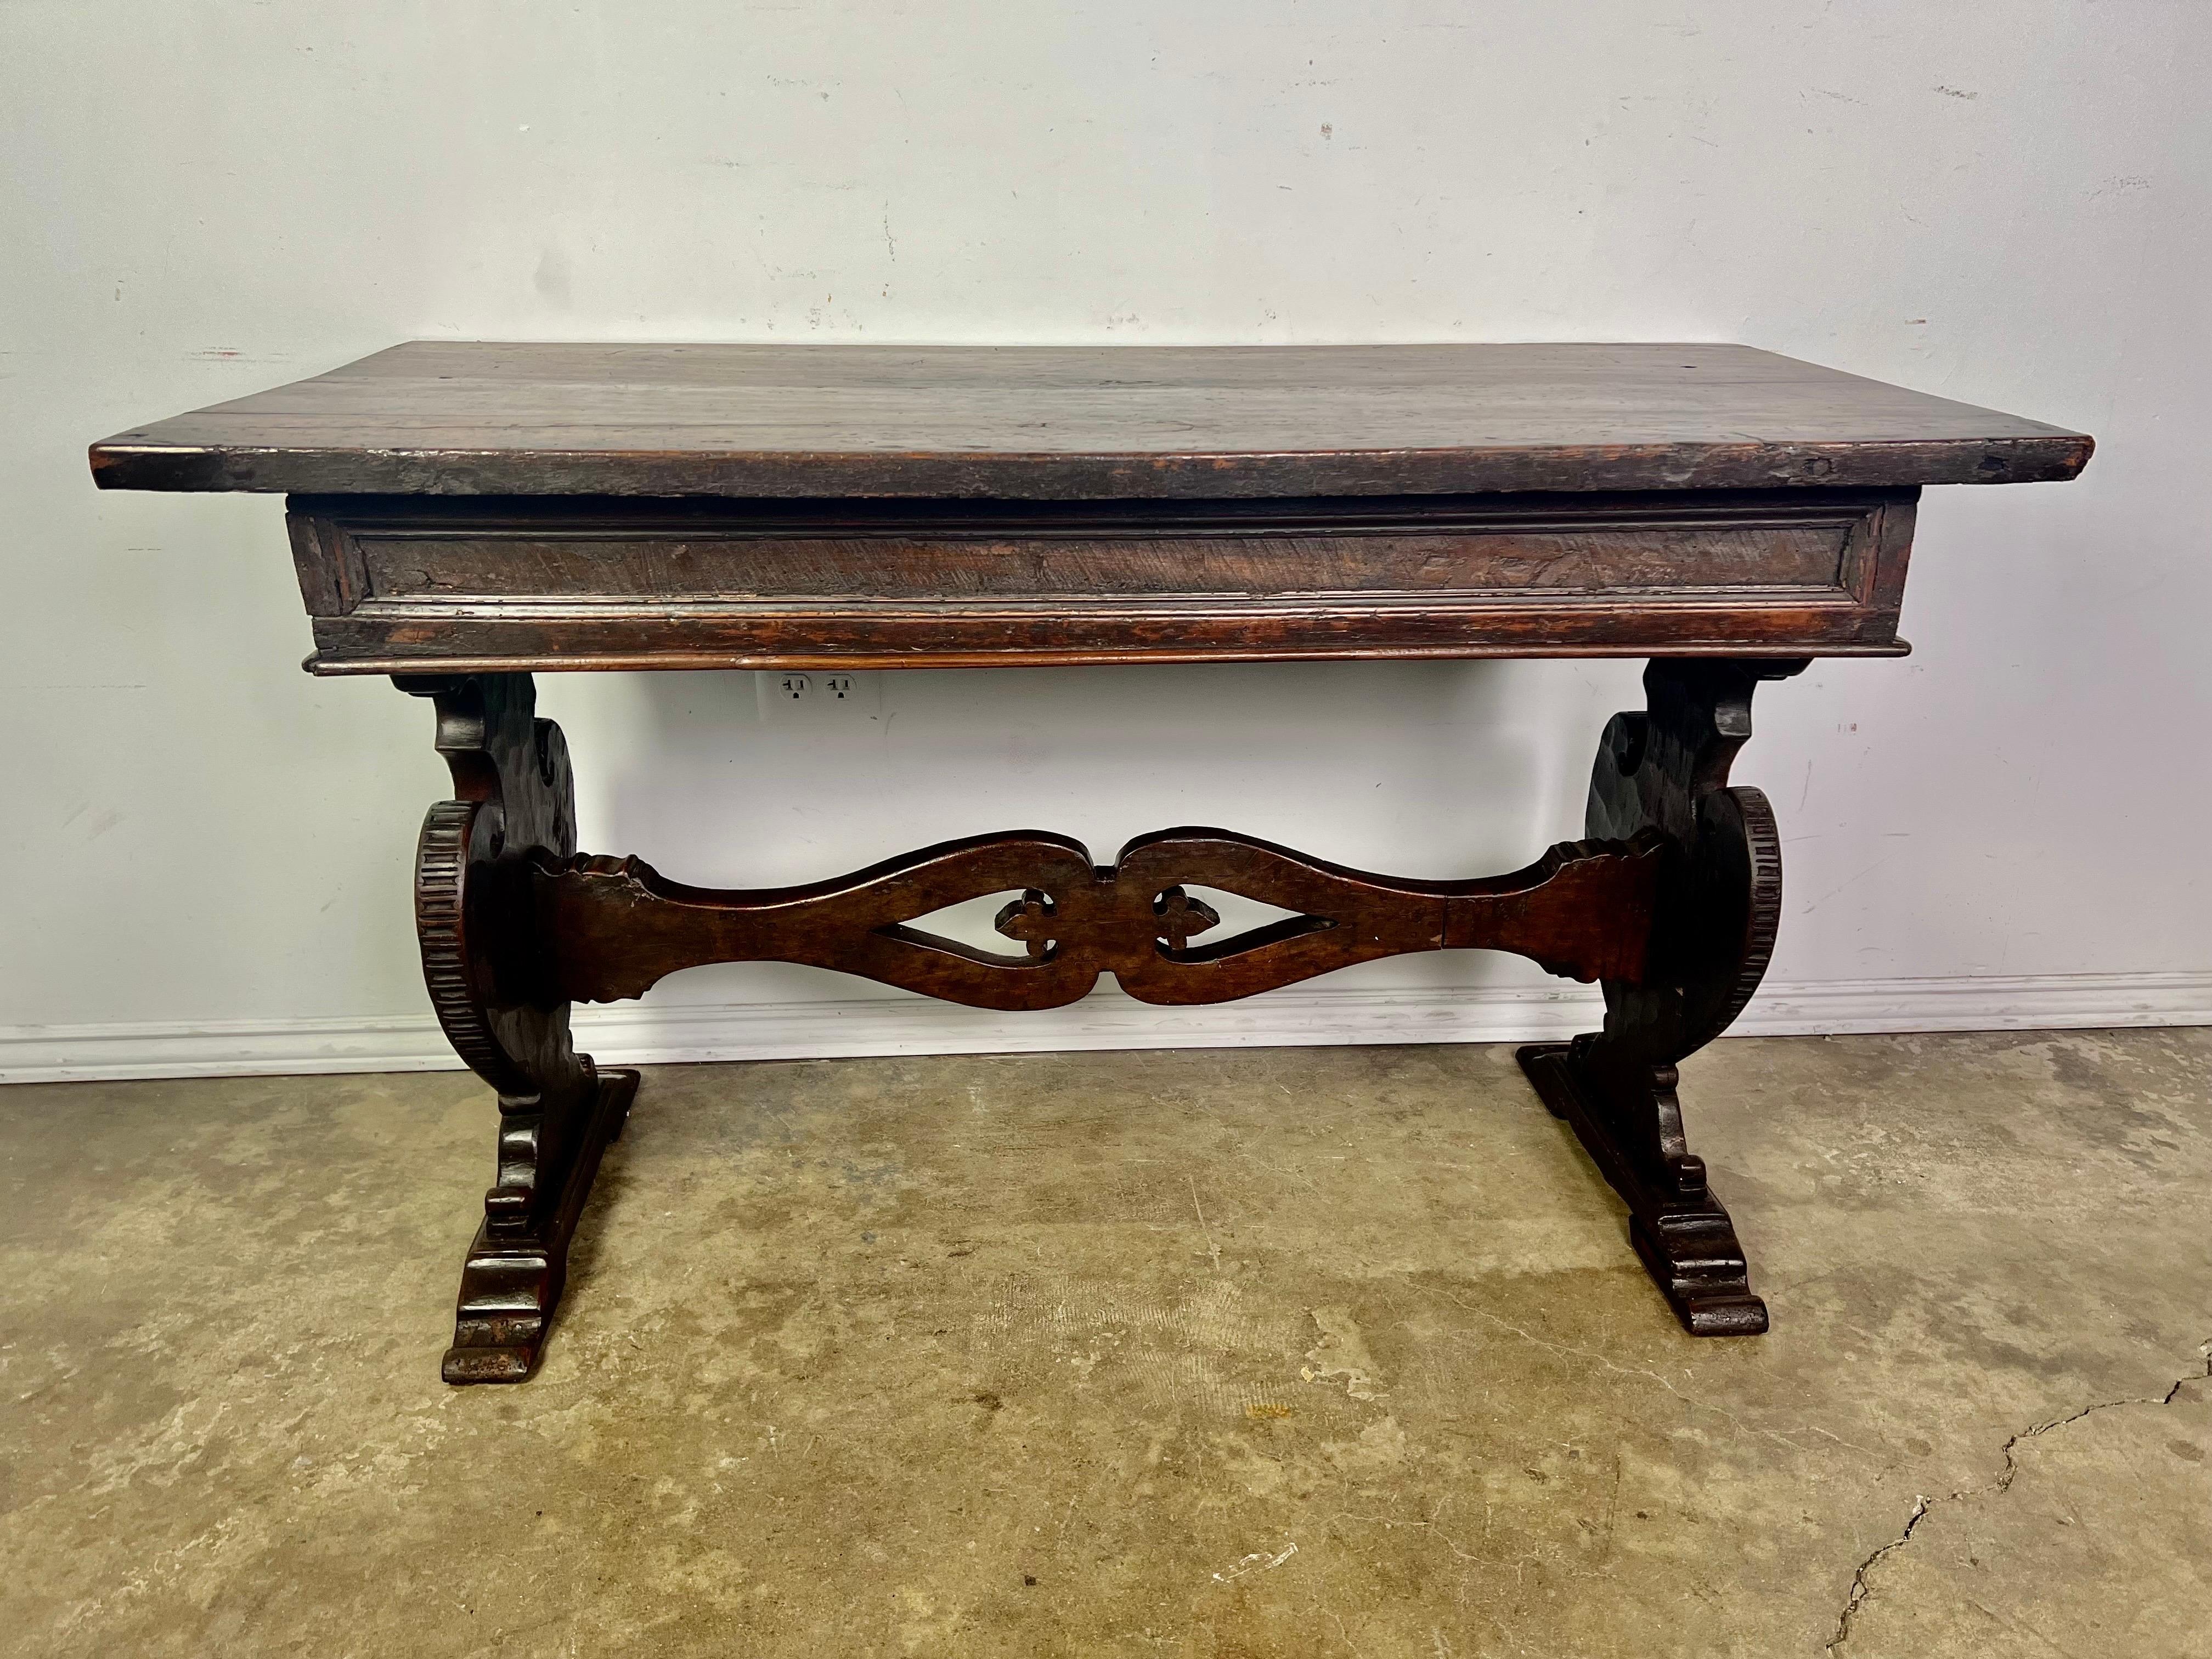 18th Century Italian walnut trestle style table. A rectangular top sits on a pair of lyre shaped bases connected by a center stretcher. The stretcher is hand carved with fleur dy lis within a pair of connecting loops. The table has developed a